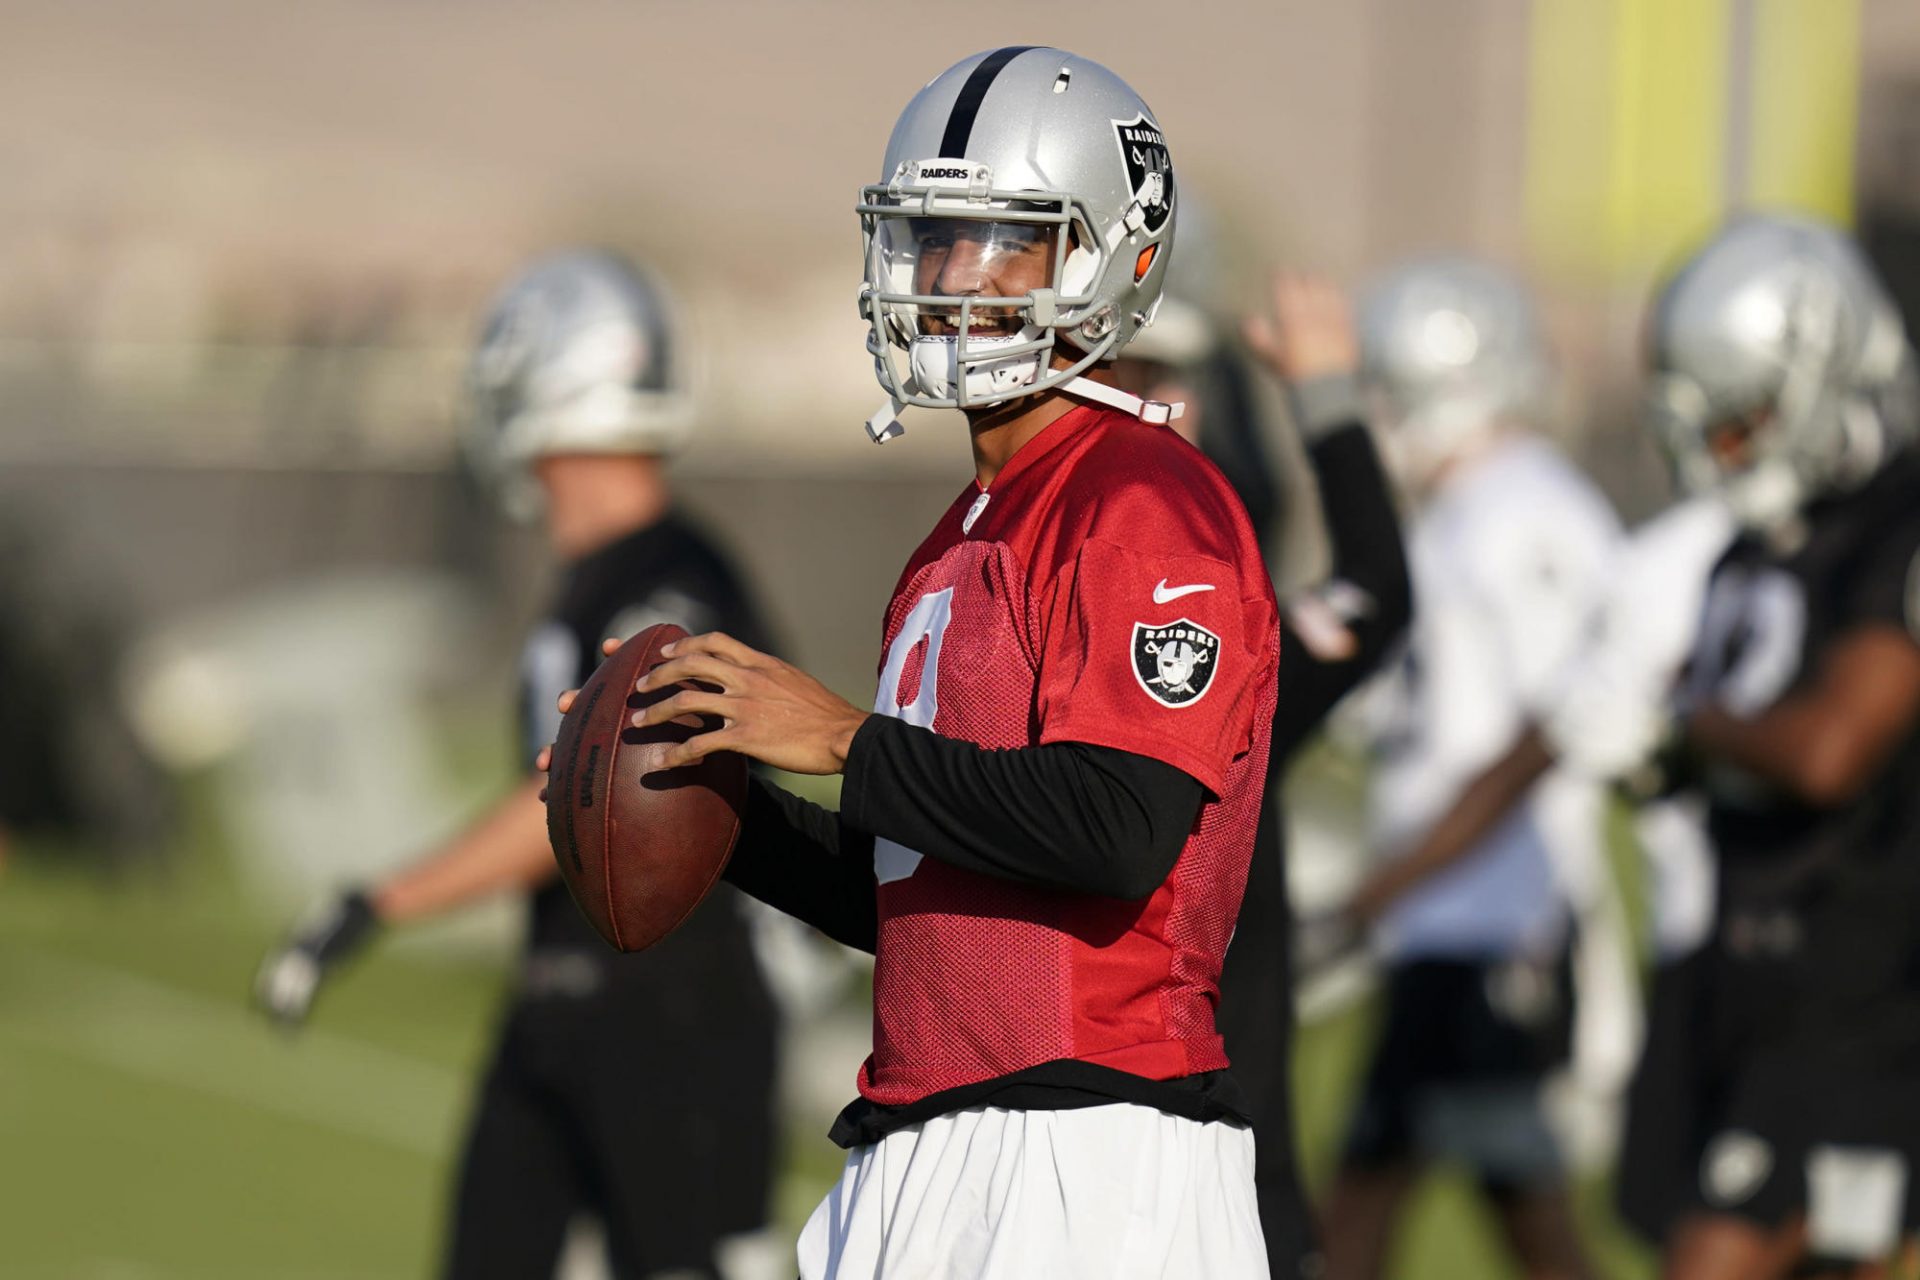 Two interceptions by Raiders LB Nick Kwiatkoski upends ‘hell of a camp’ by Marcus Mariota